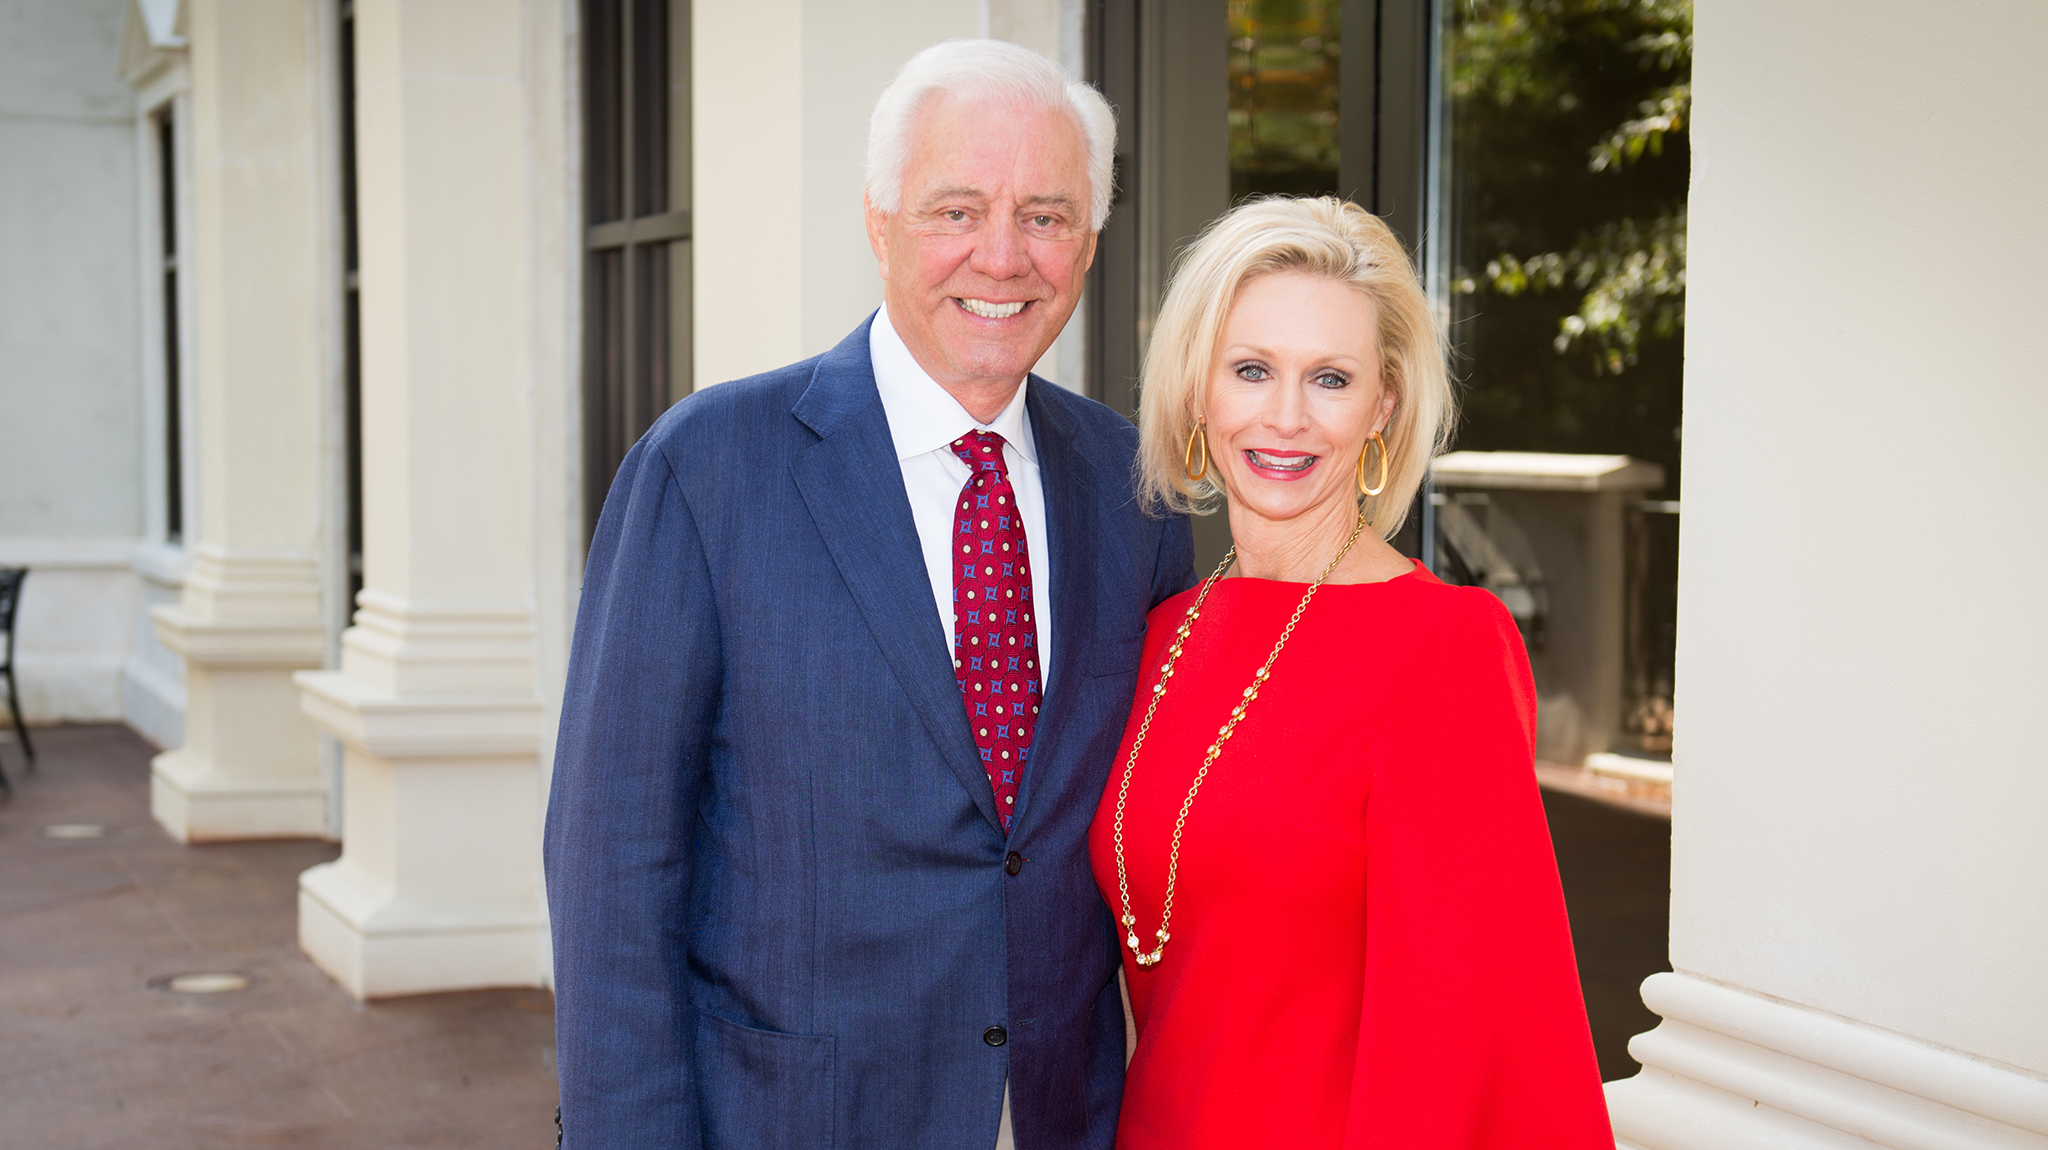 UM alumna Diane Triplett Holloway (right), with her husband, J.L. Holloway, have made a $250,000 gift to support the Ole Miss Women’s Council for Philanthropy’s Global Leadership Circle. Photo by Bill Dabney/UM Foundation